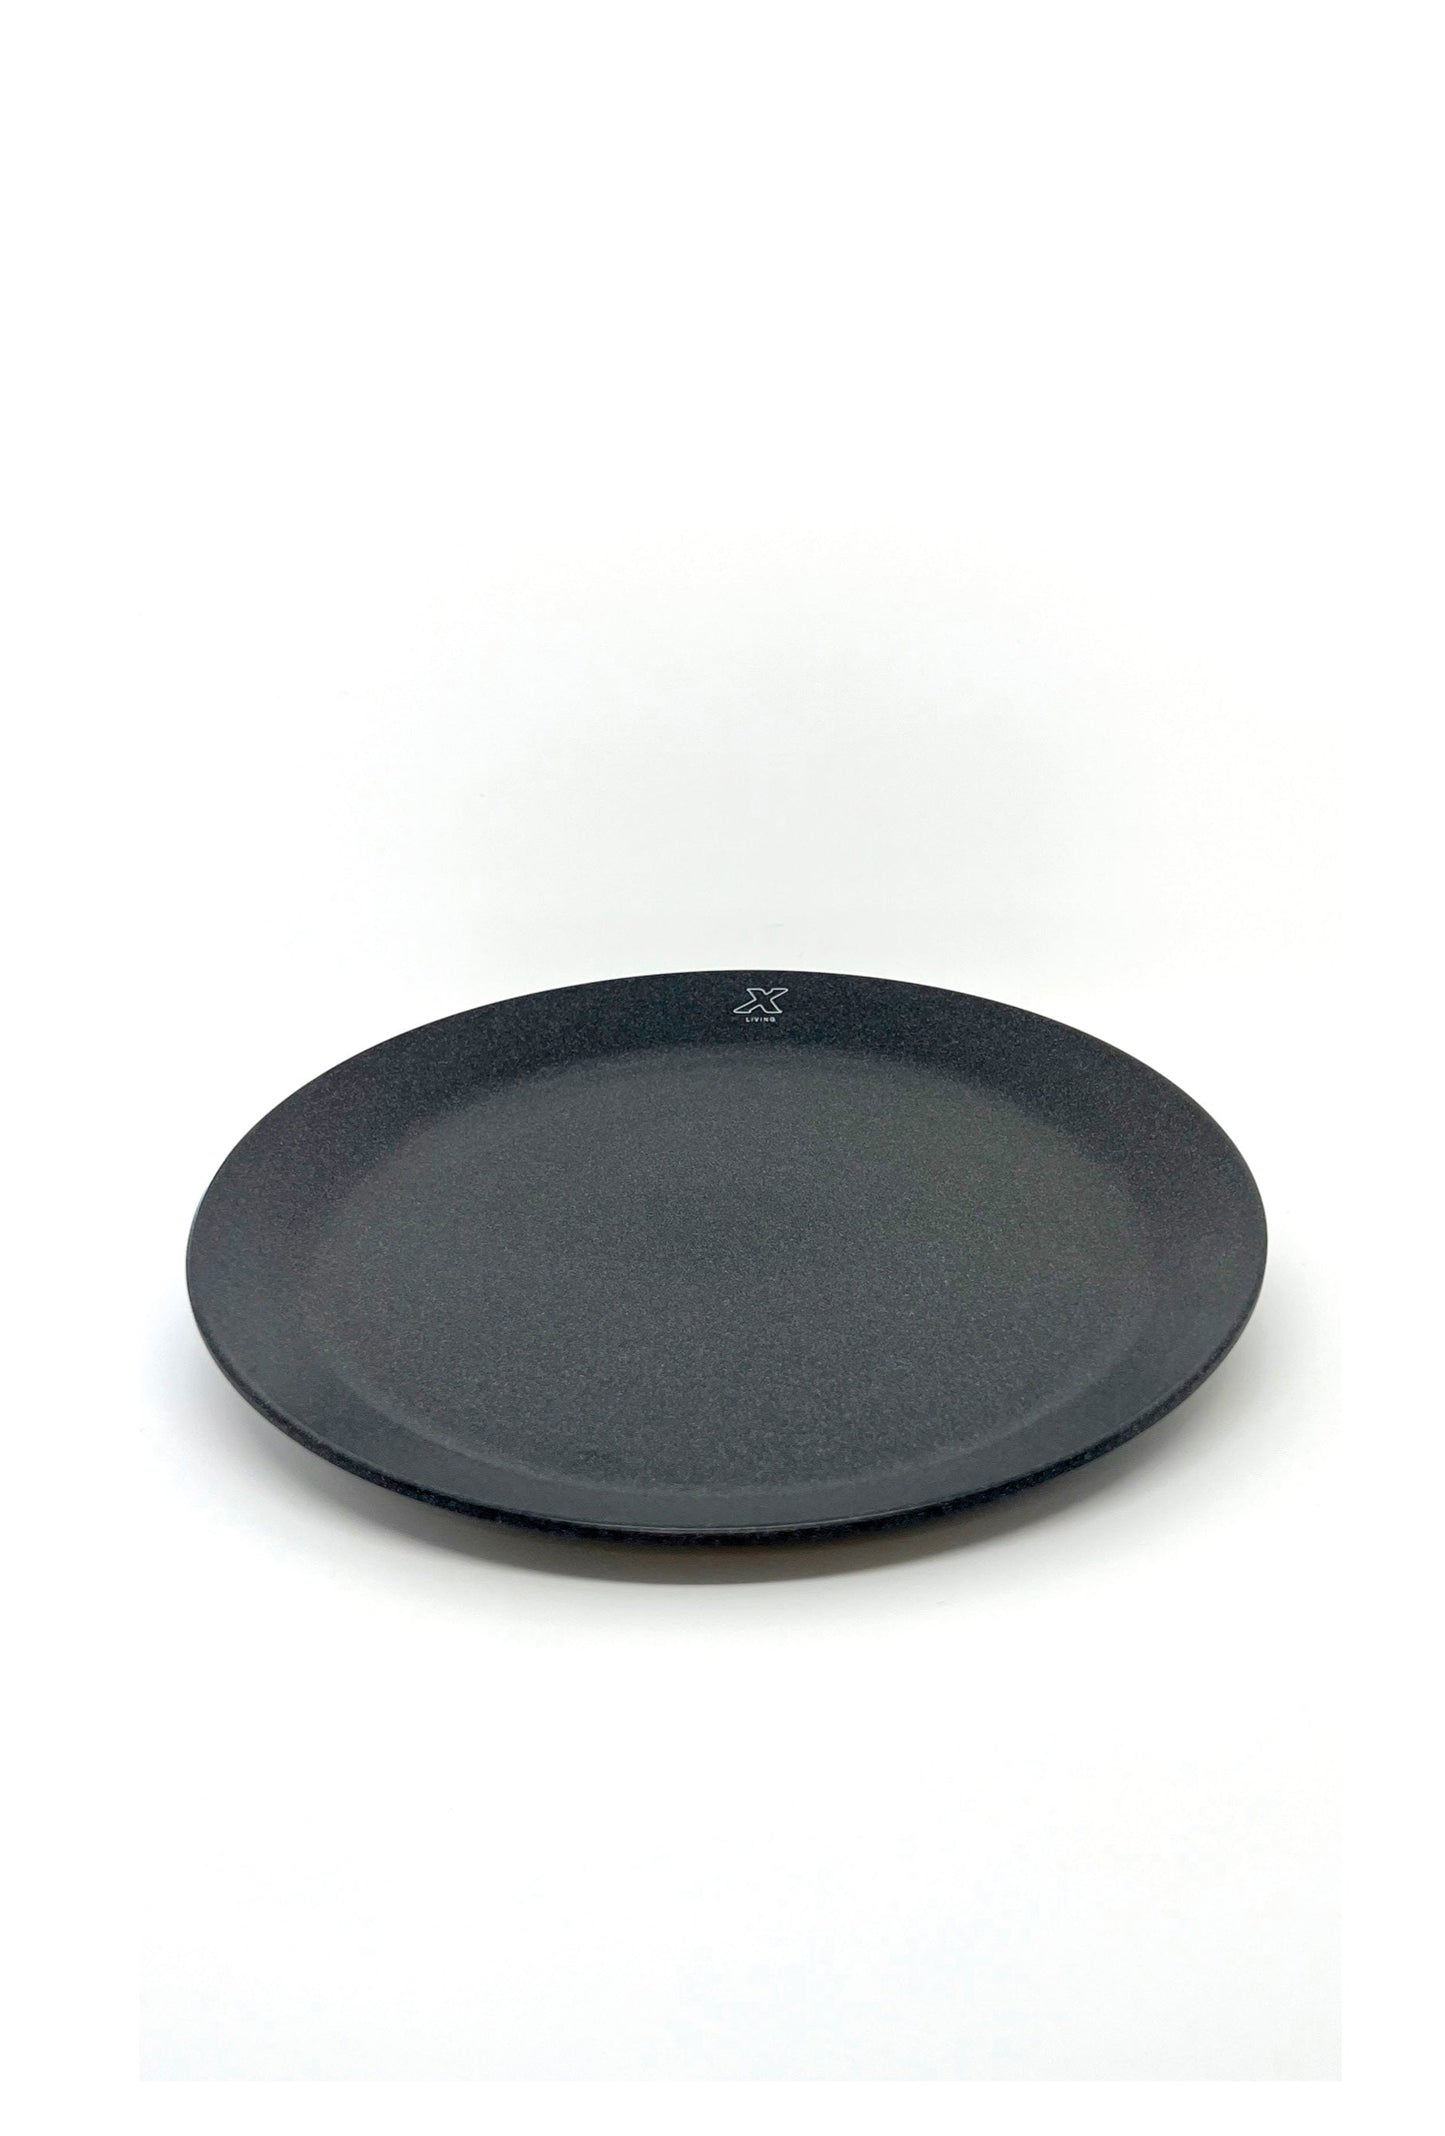 Lunch plate - Pebble black (240 mm.)